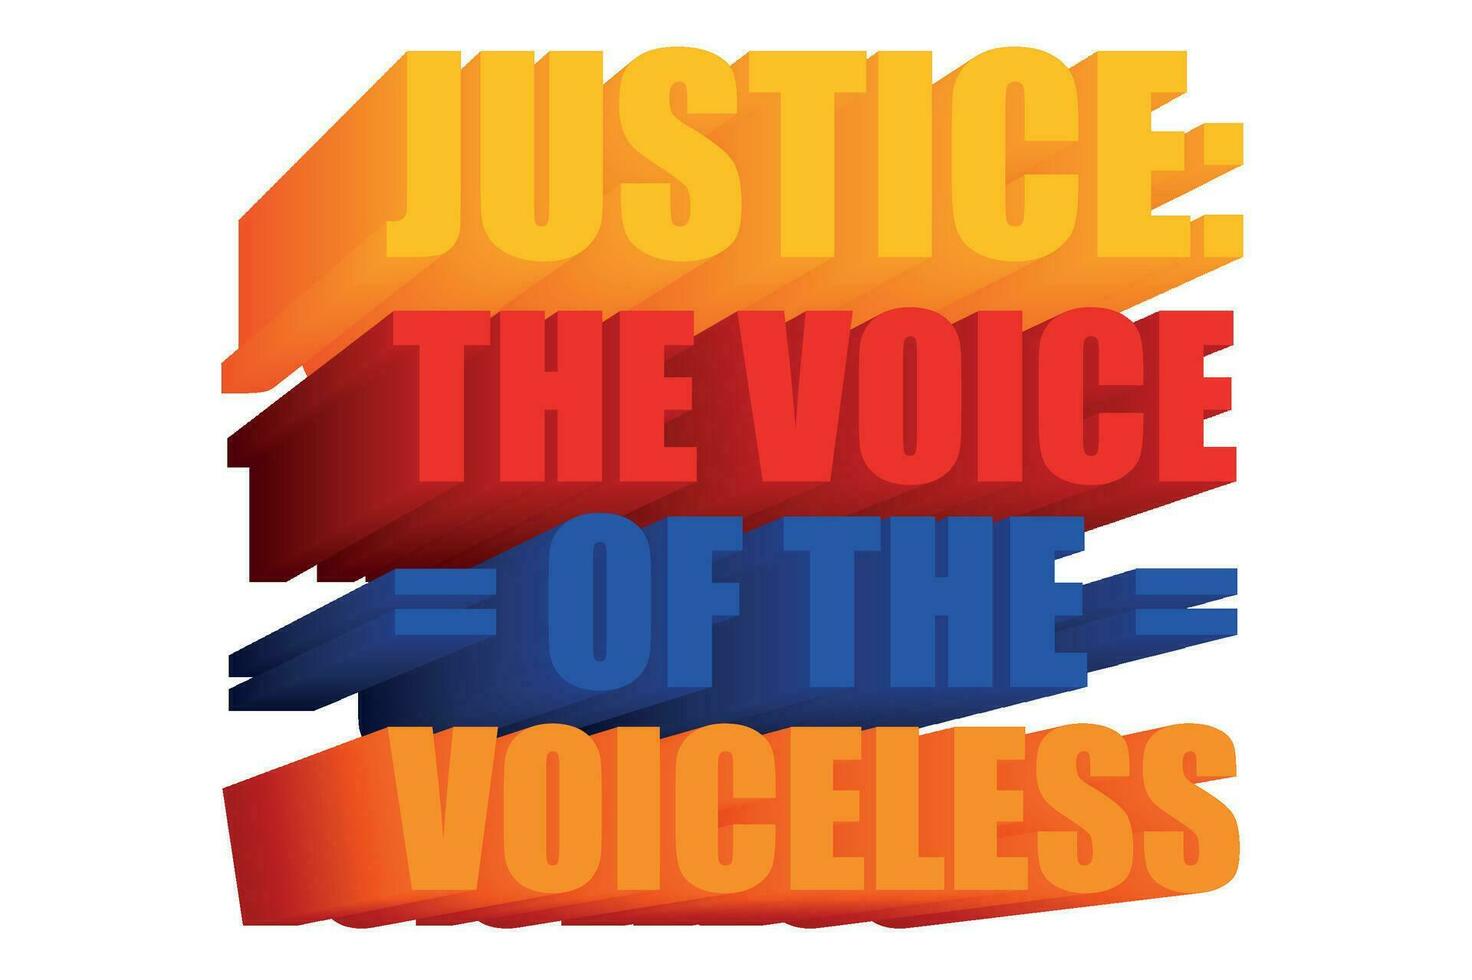 3D Text Design About World Day for International Justice Quotes vector